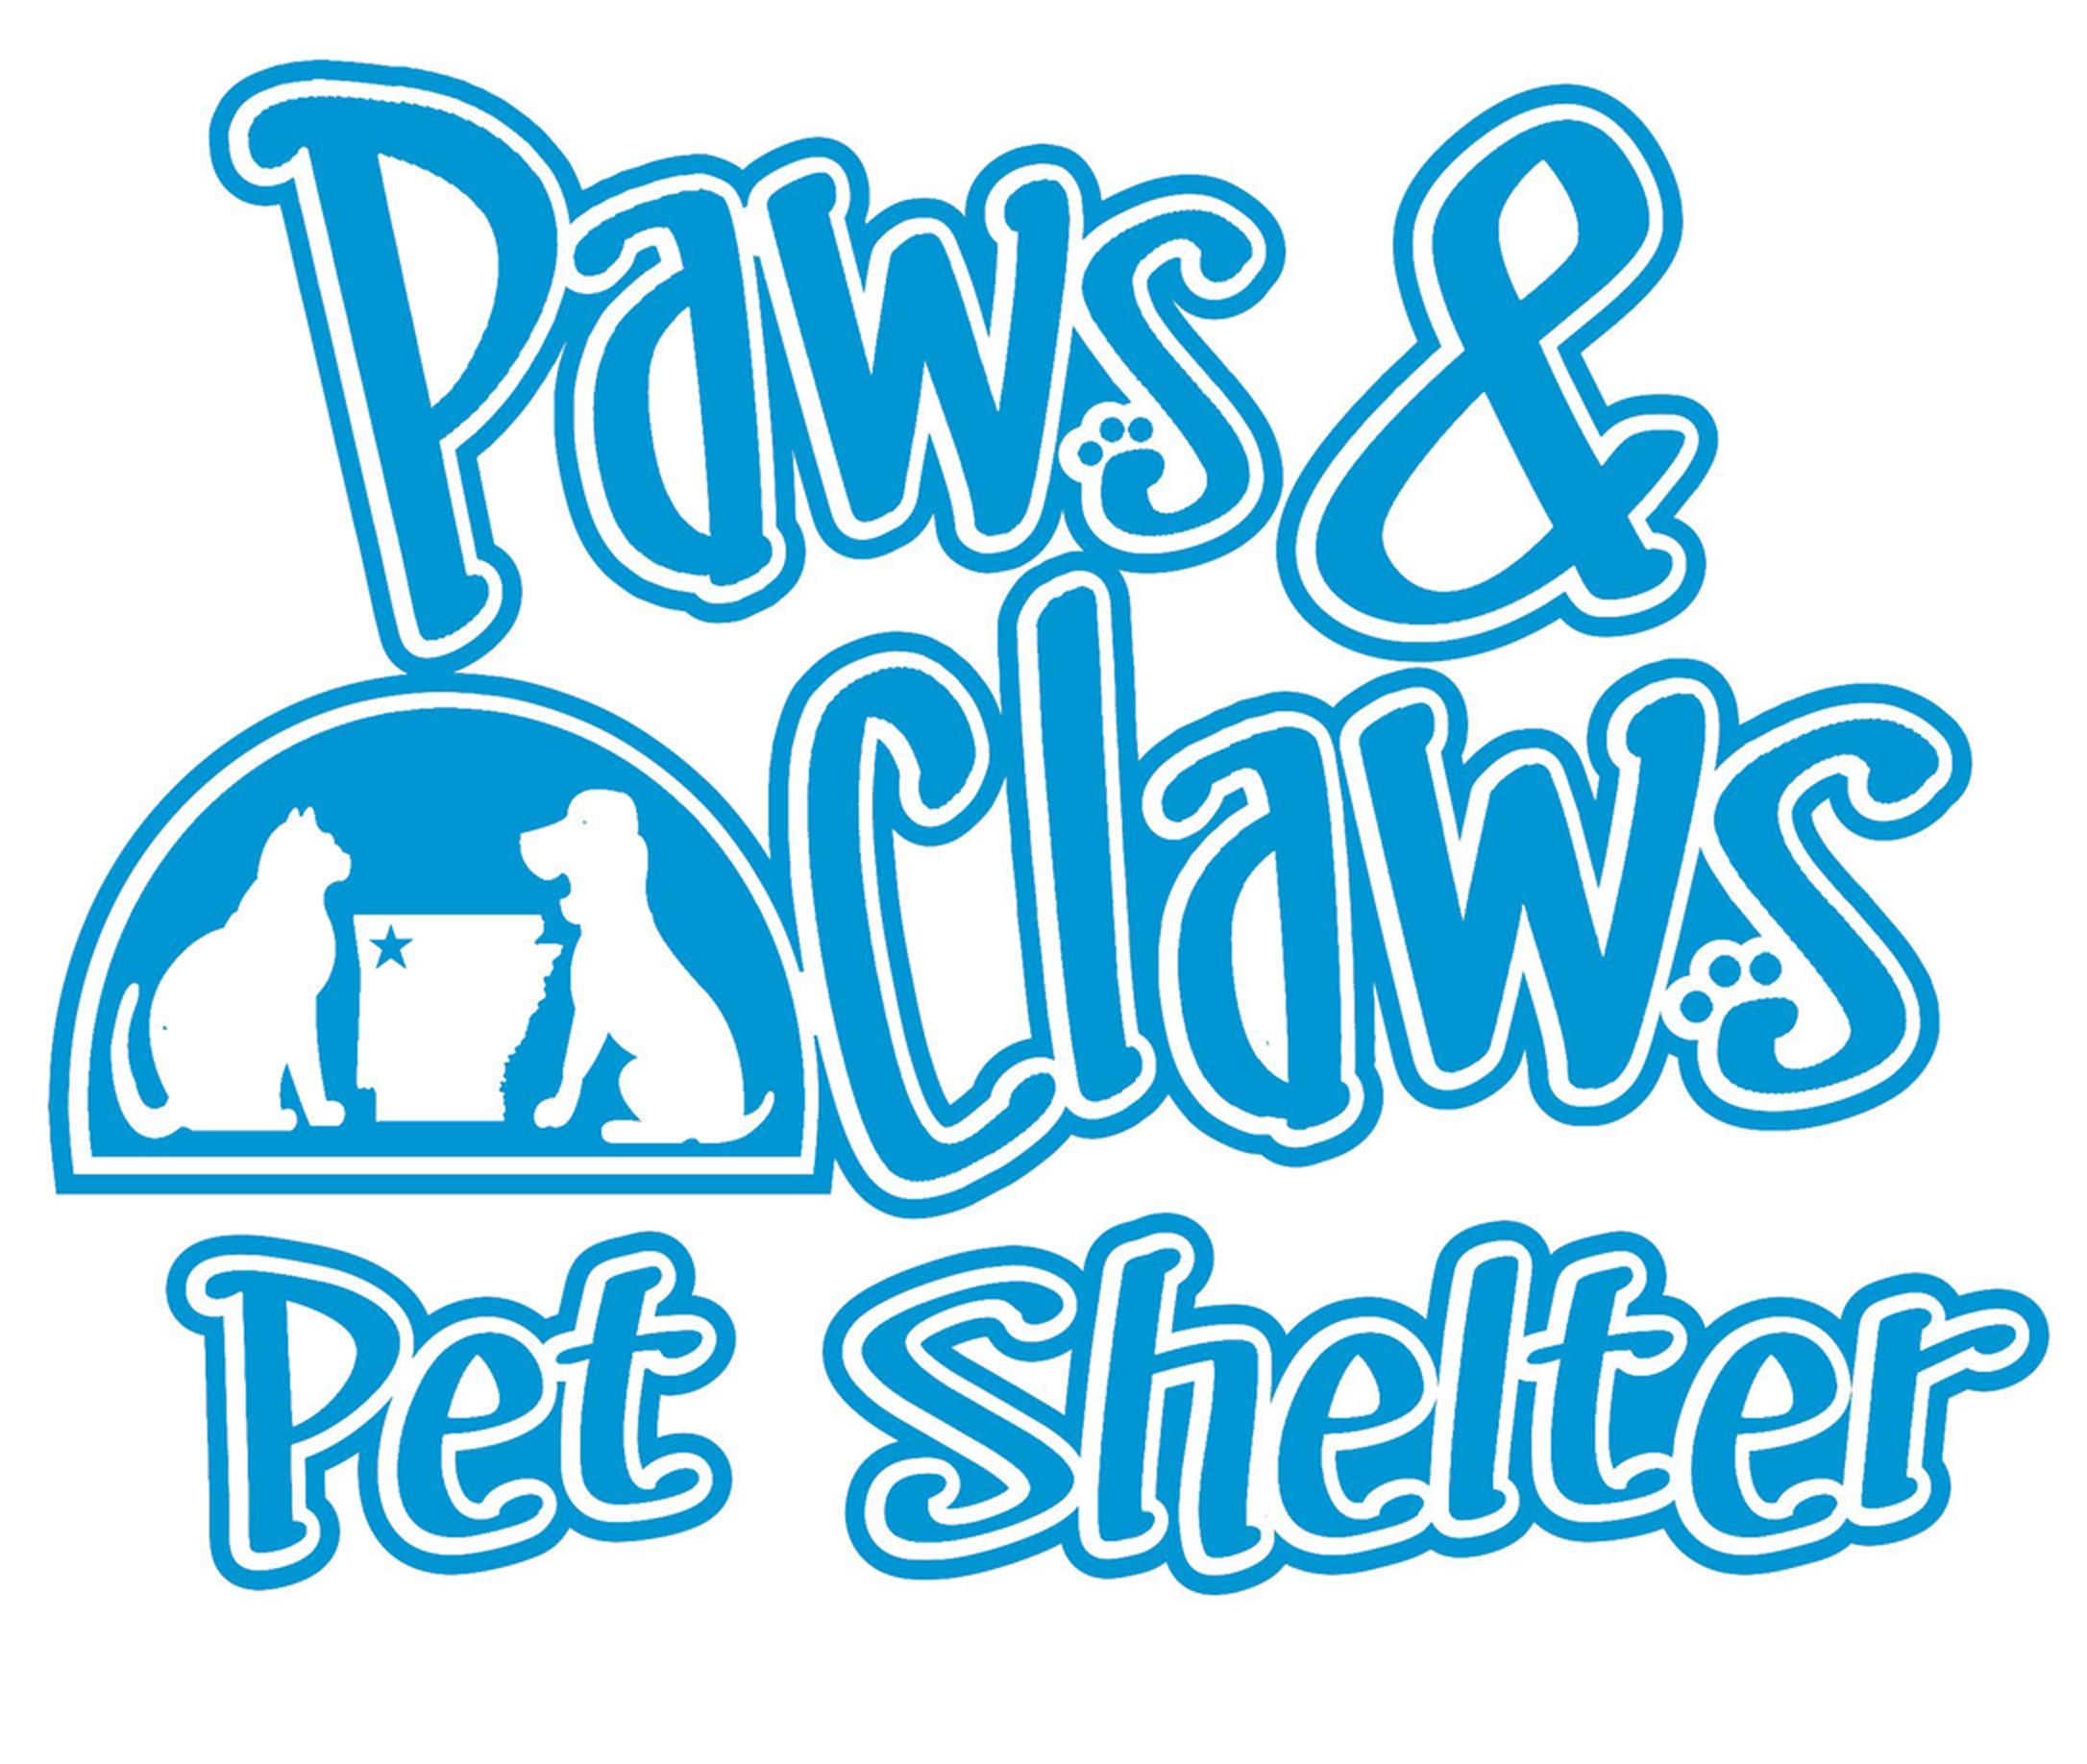 Pets for Adoption at Paws & Claws Pet Shelter, in Huntsville, AR | Petfinder